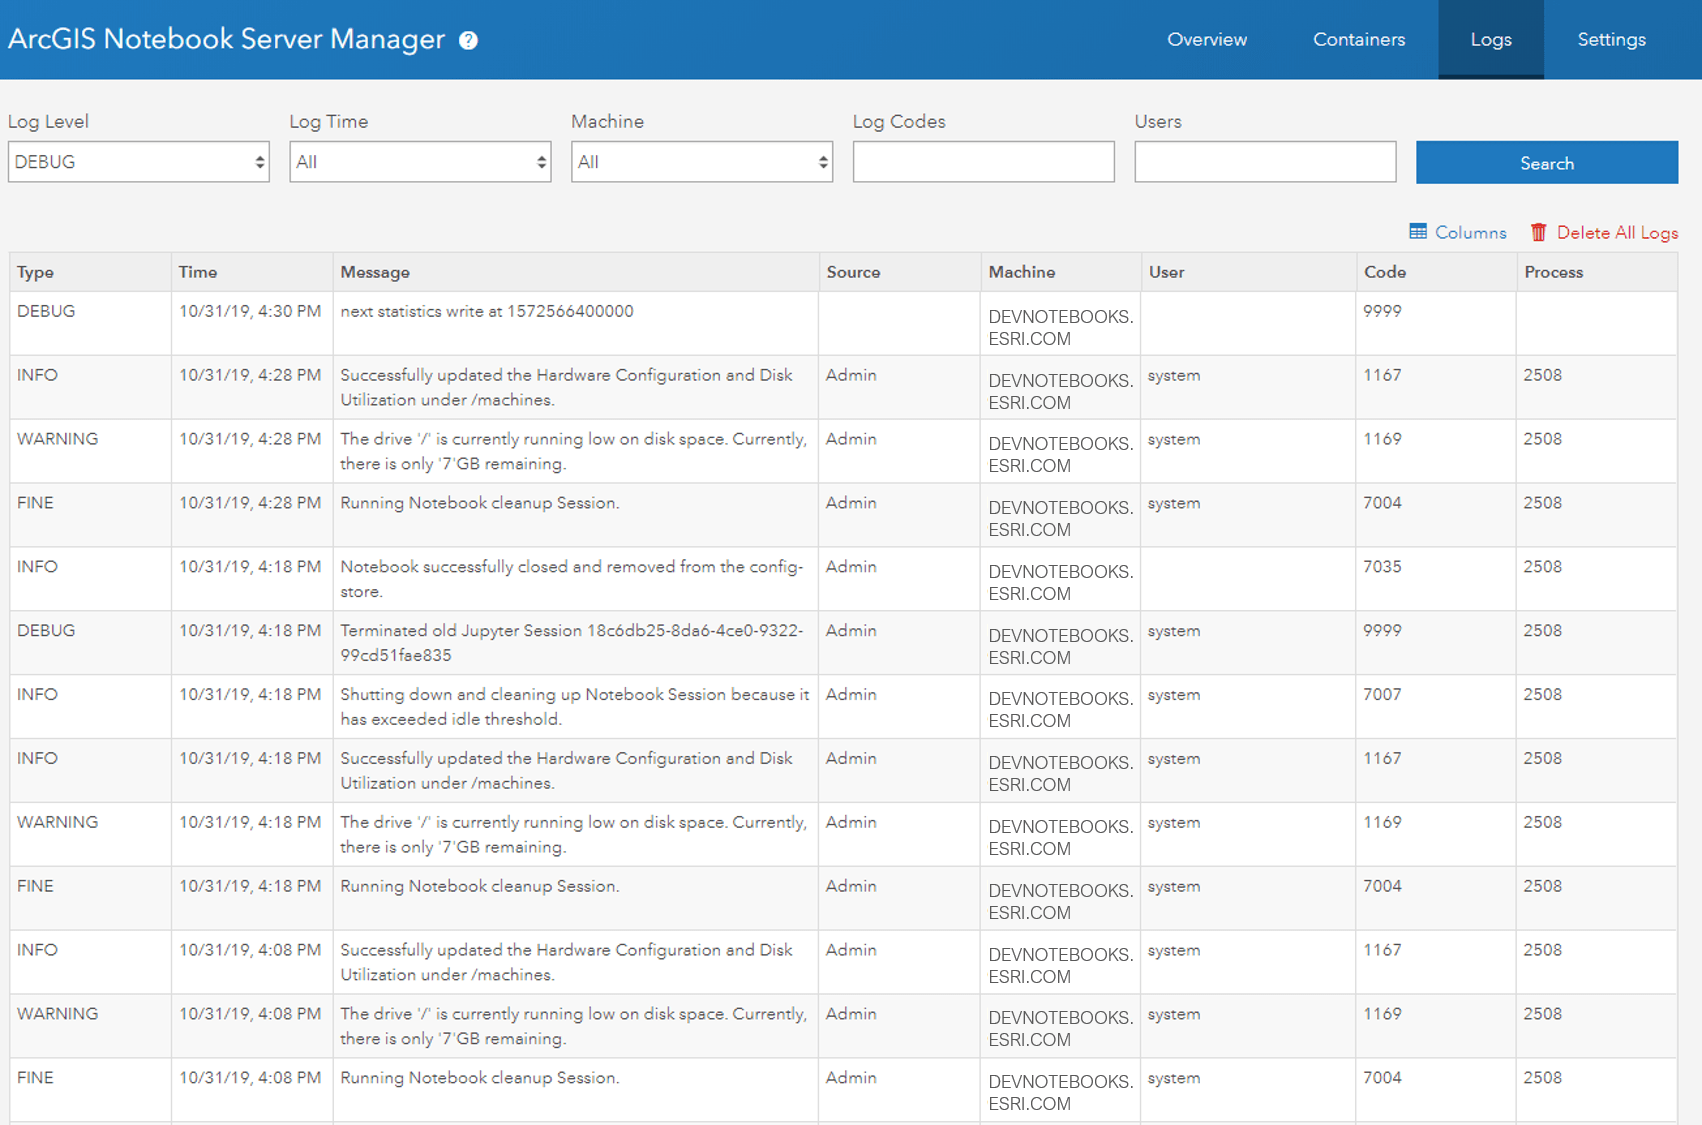 Image of the Logs page of the ArcGIS Notebook Server Manager app